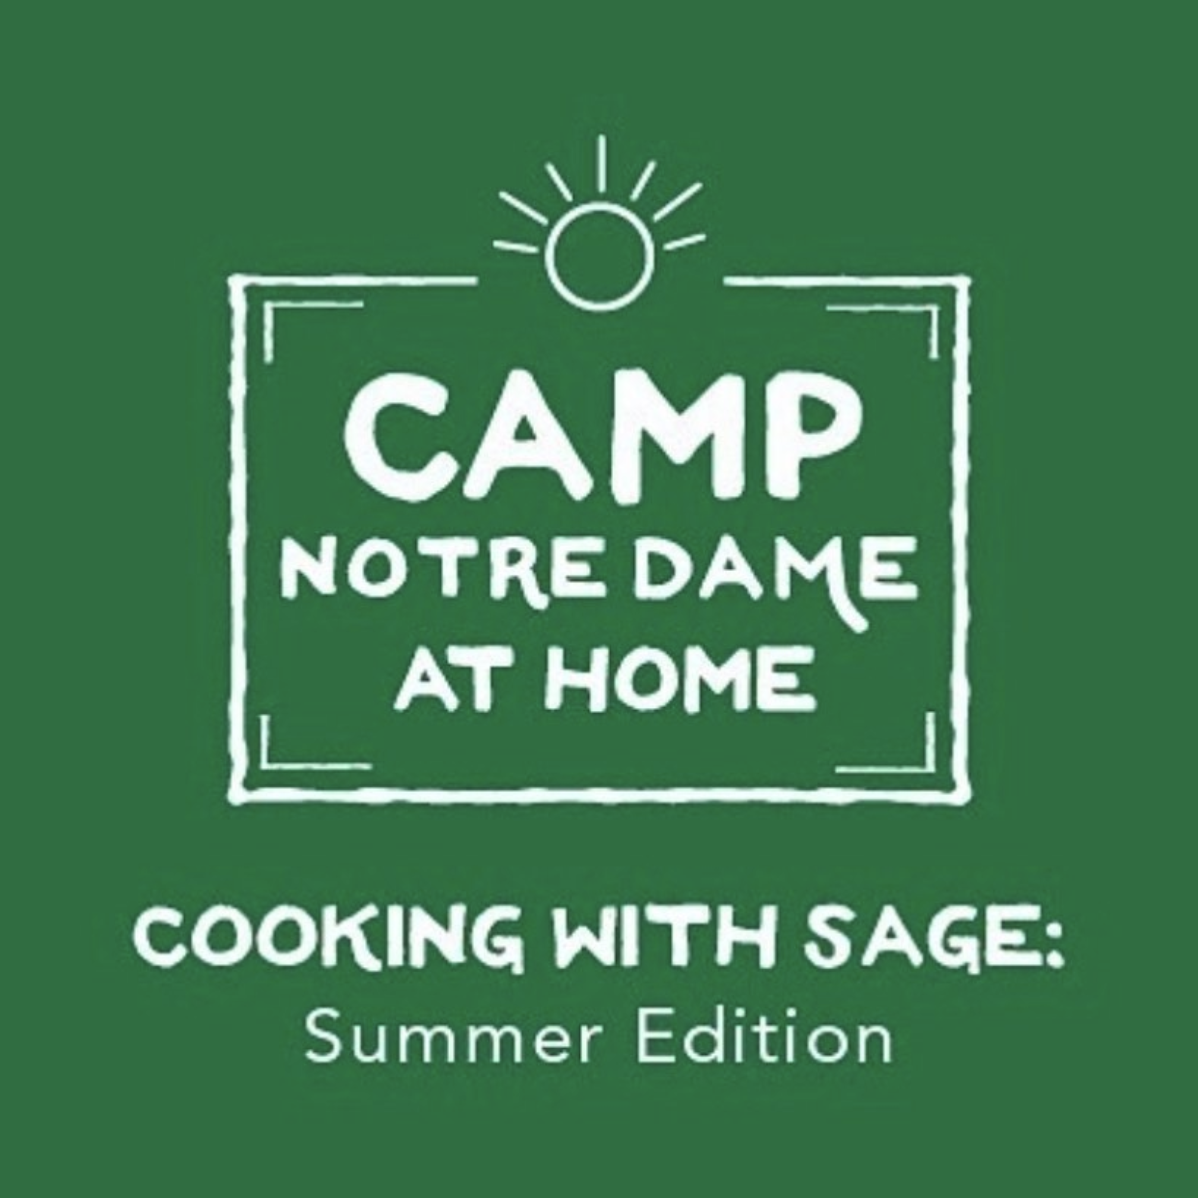 cooking with SAGE logo green